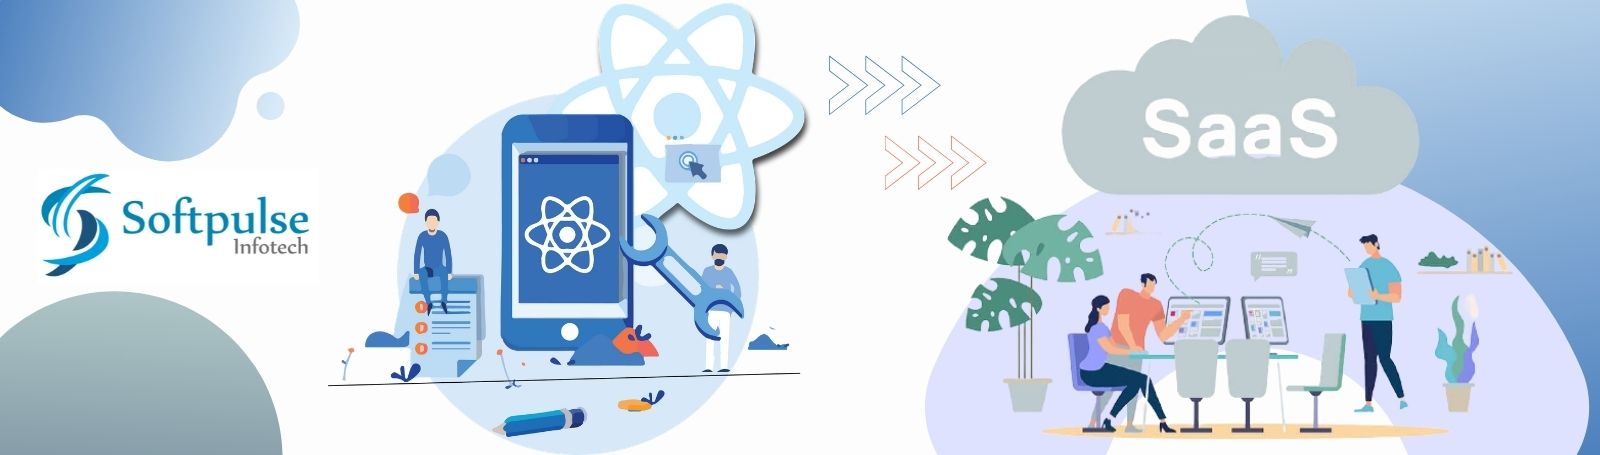 Why Is Reactjs An Excellent Choice For Saas Product Development?